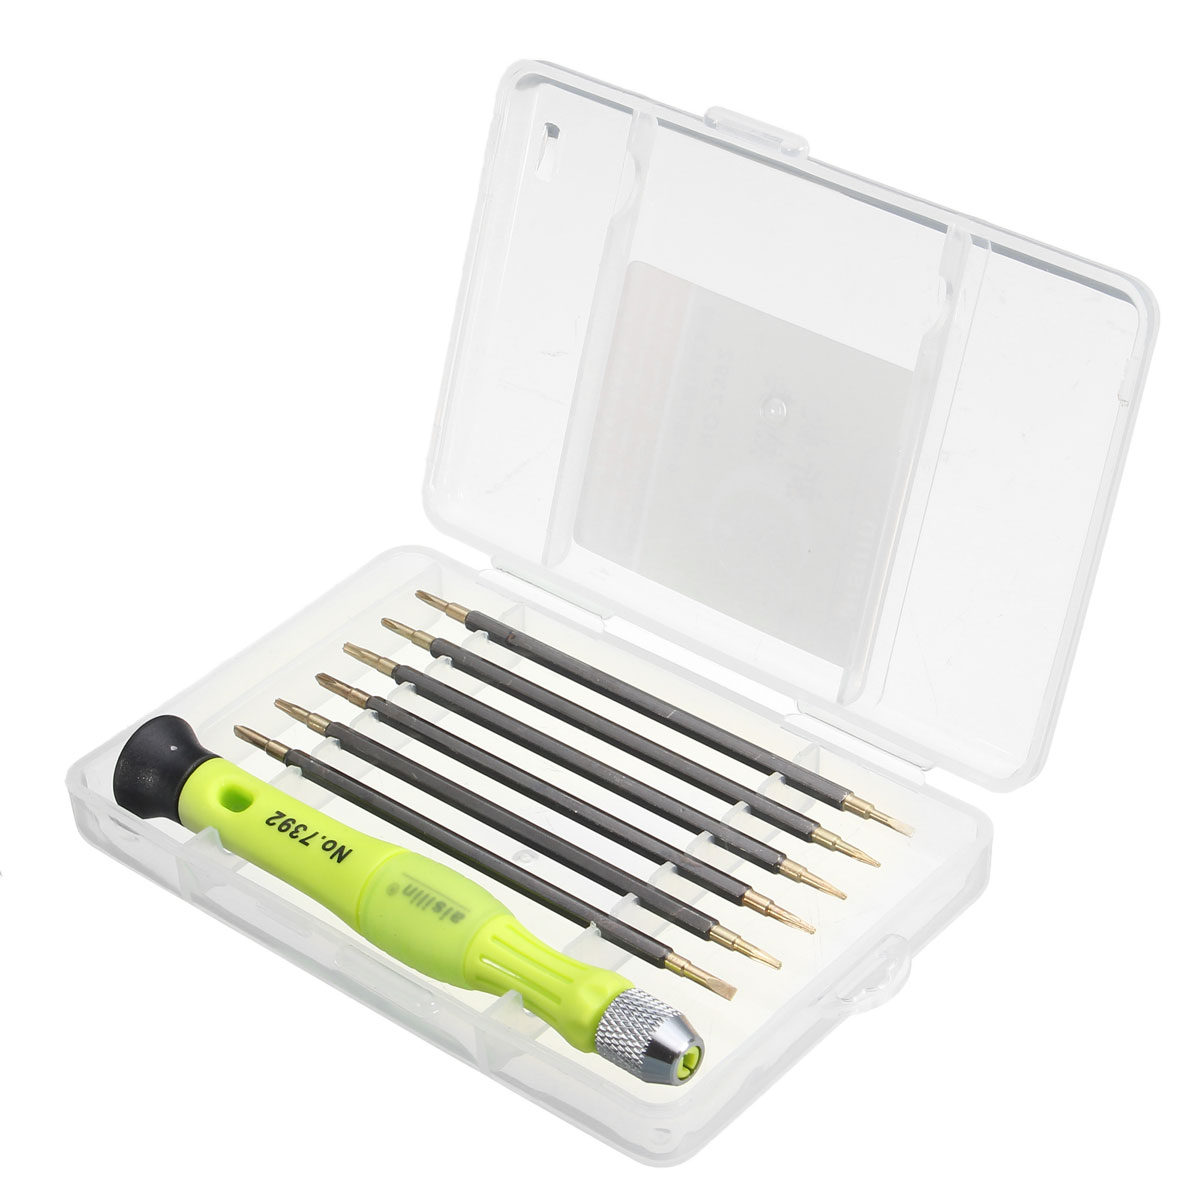 7-in-1-Portable-Screwdriver-Kit-Set-Precision-Professional-Repair-Hand-Tool-with-Box-1020198